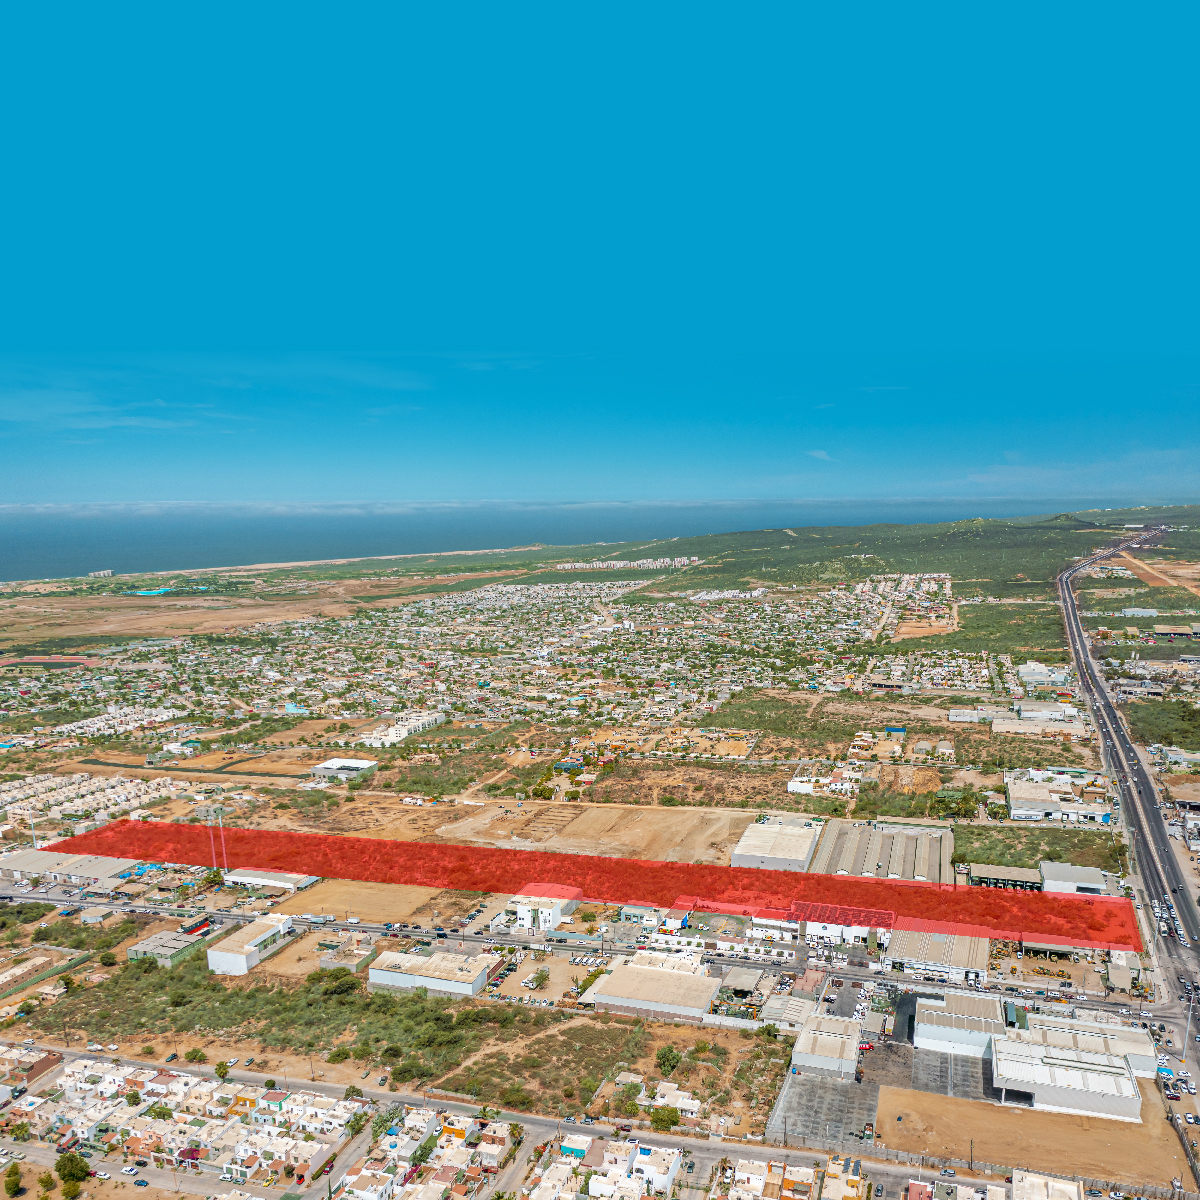 CABO COMMERCIAL-RESIDENTIAL LAND – TRANSPENINSULAR HIGHWAY KM-19
Offered at $8,900,000 USD | $150,561,300 MXN
538,195.52 TOTAL SF | MLS: 23-2209

Listed by @MartinTheAgency & Carl Velleryd

Prime parcel for commercial or residential use. This parcel has over 78 linear meters (256